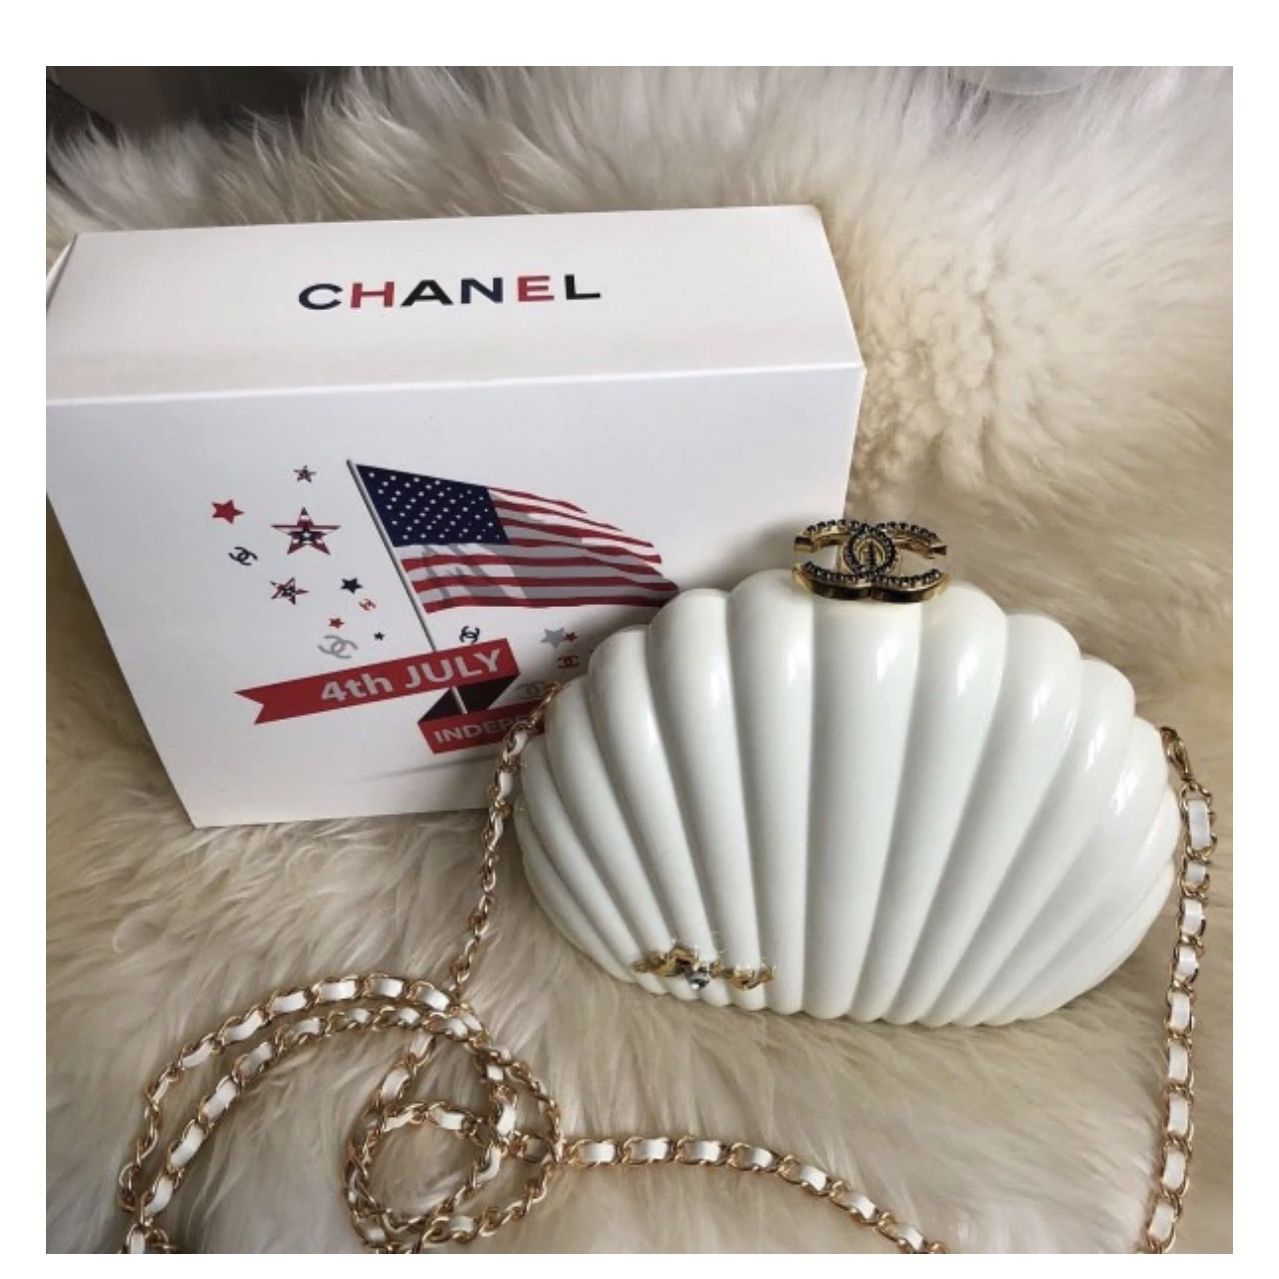 CHANEL Shell Bags & Handbags for Women, Authenticity Guaranteed